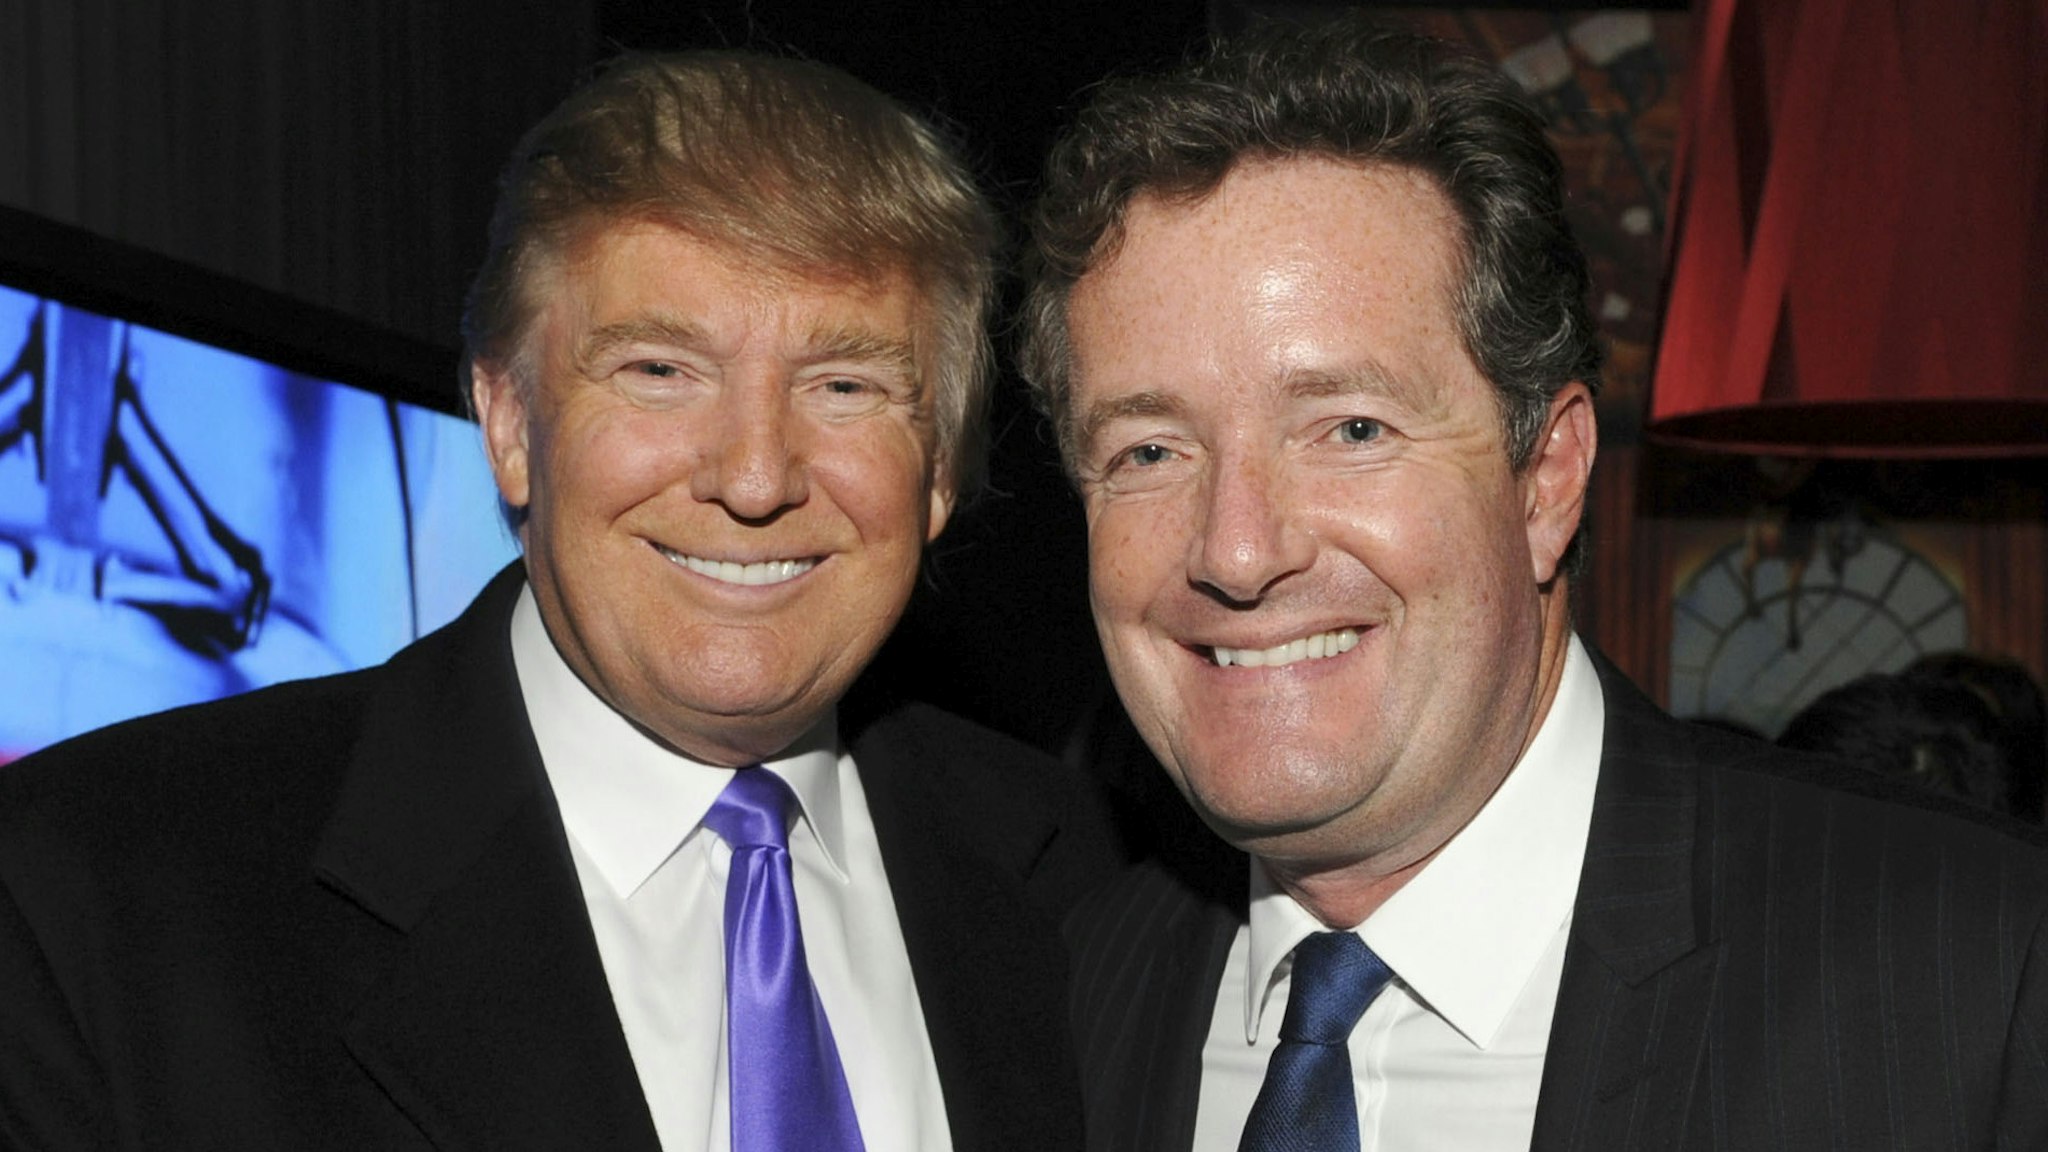 NEW YORK - NOVEMBER 10: Television Personality Donald Trump and journalist Piers Morgan attend the celebration of Perfumania and Kim Kardashian�s appearance on NBC�s "The Apprentice" at the Provocateur at The Hotel Gansevoort on November 10, 2010 in New York, New York.